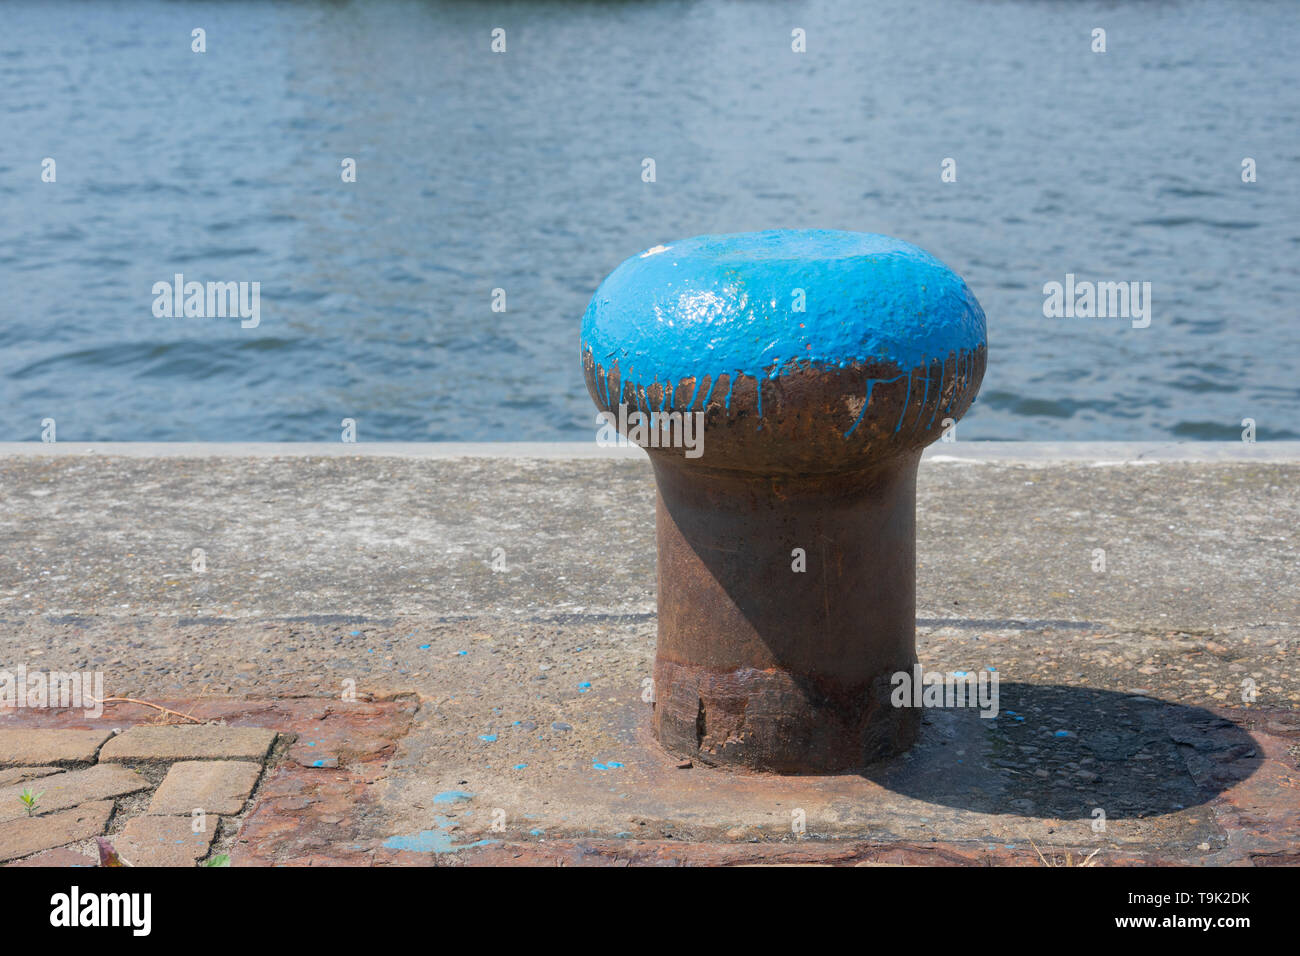 A blue painted bollard on the side of the water Stock Photo